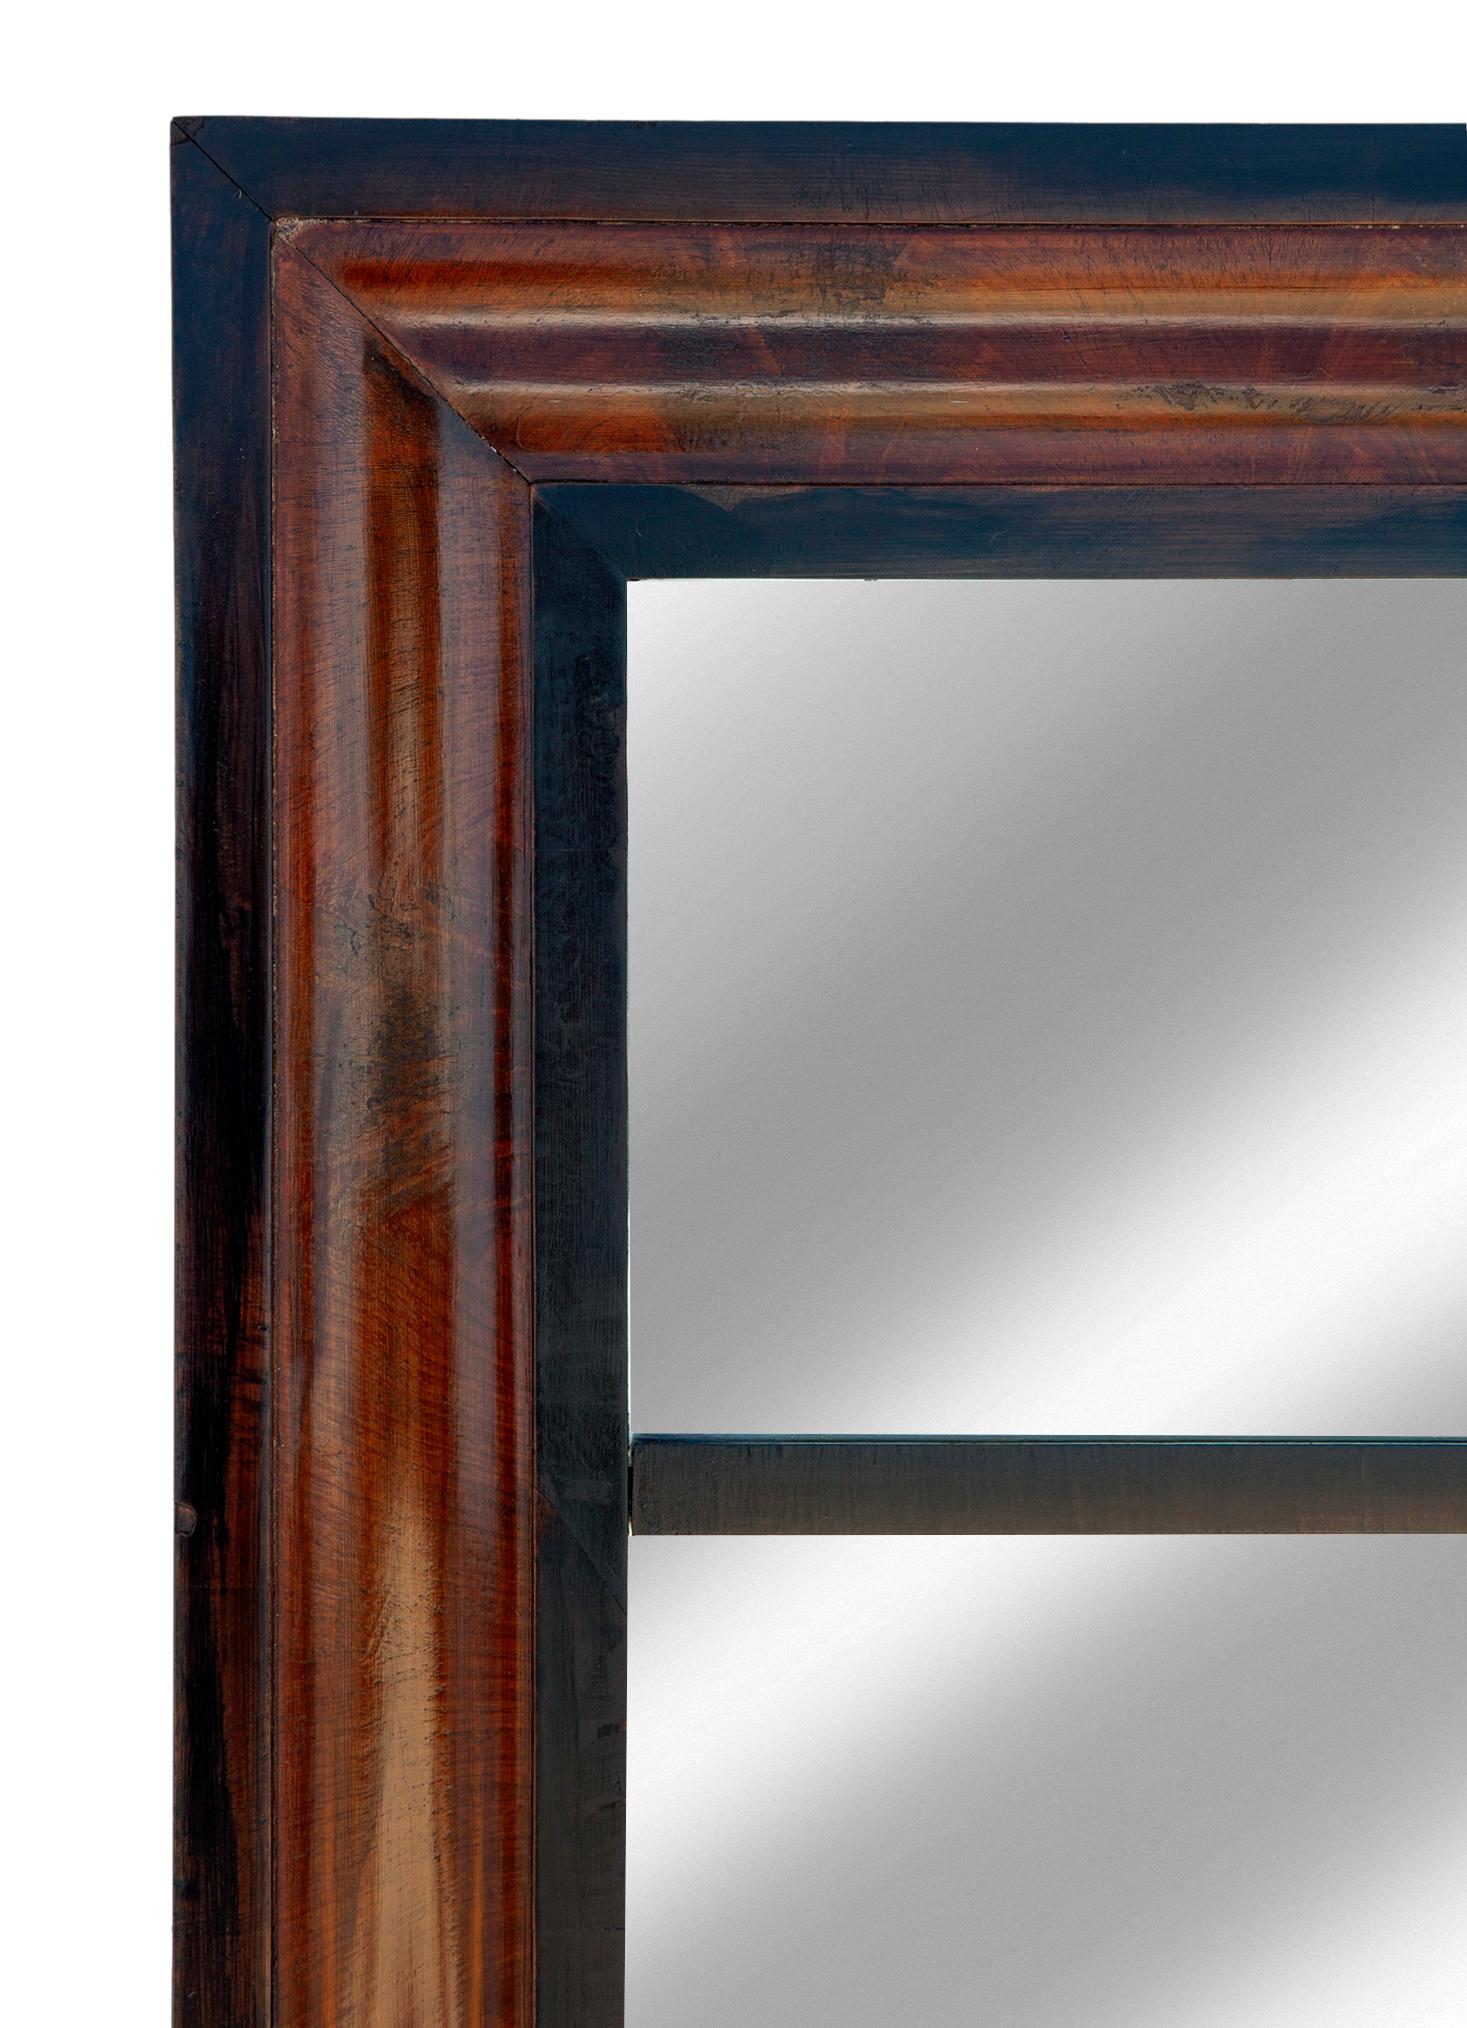 Empire Mahogany Trumeau Mirror in flame mahogany, circa early 19thC. 
Restored In ebony & polished mahogany. Classic Empire Traditional style, featuring upper & lower mirrored panes. The original wood backing is intact. 
